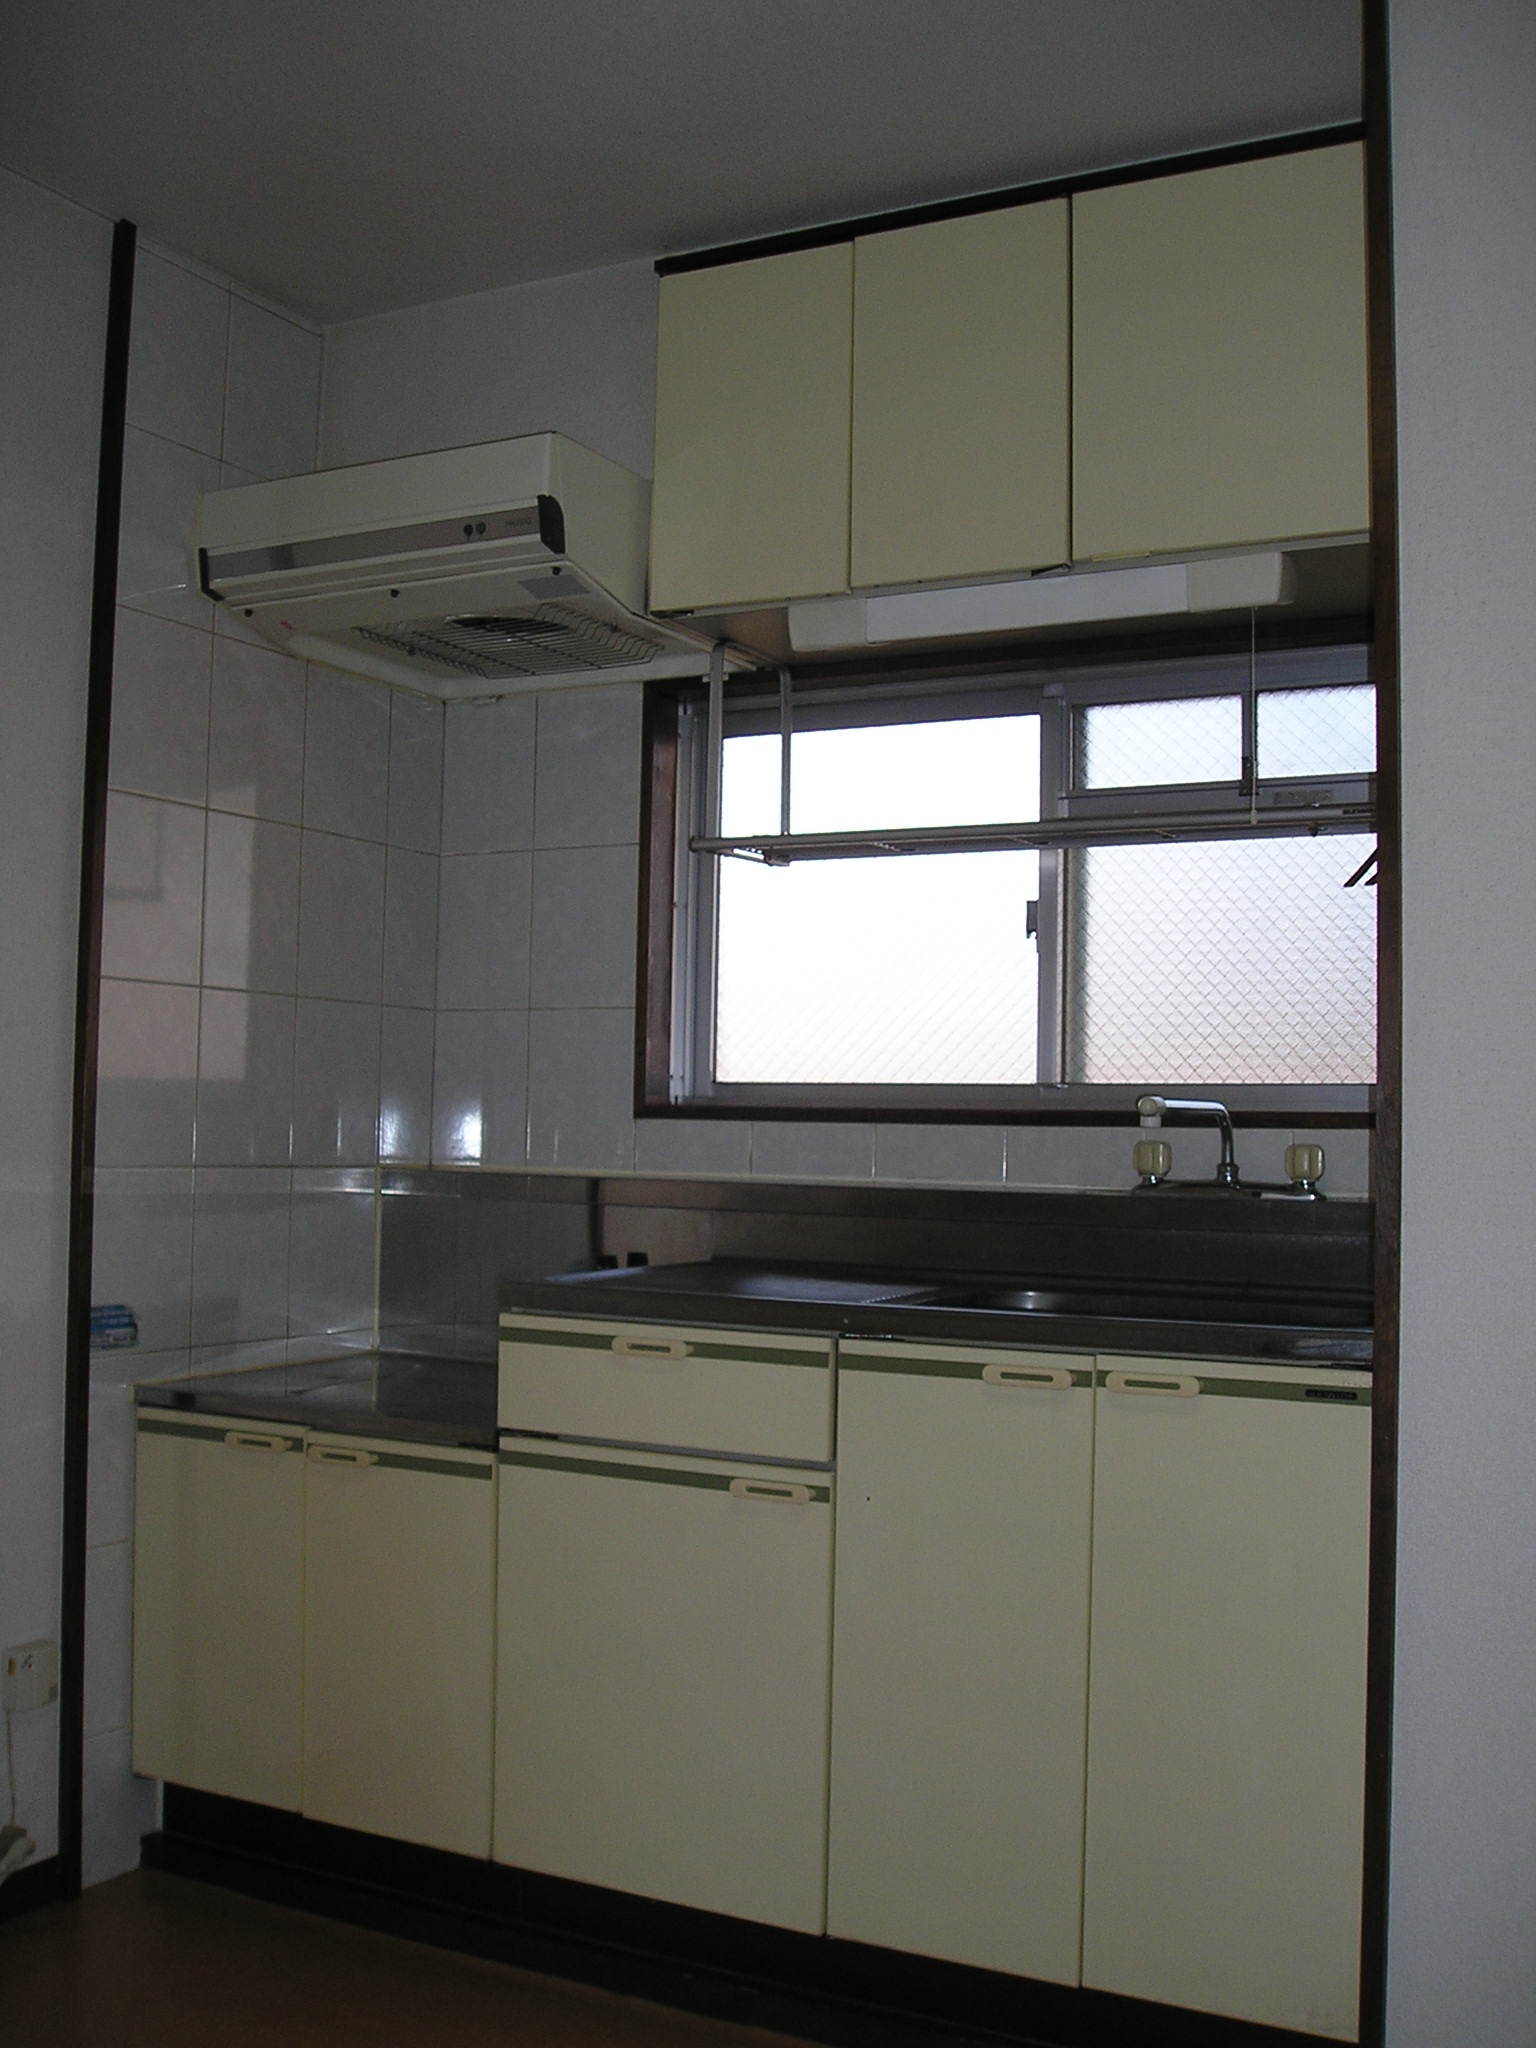 Kitchen. There is a window before the kitchen